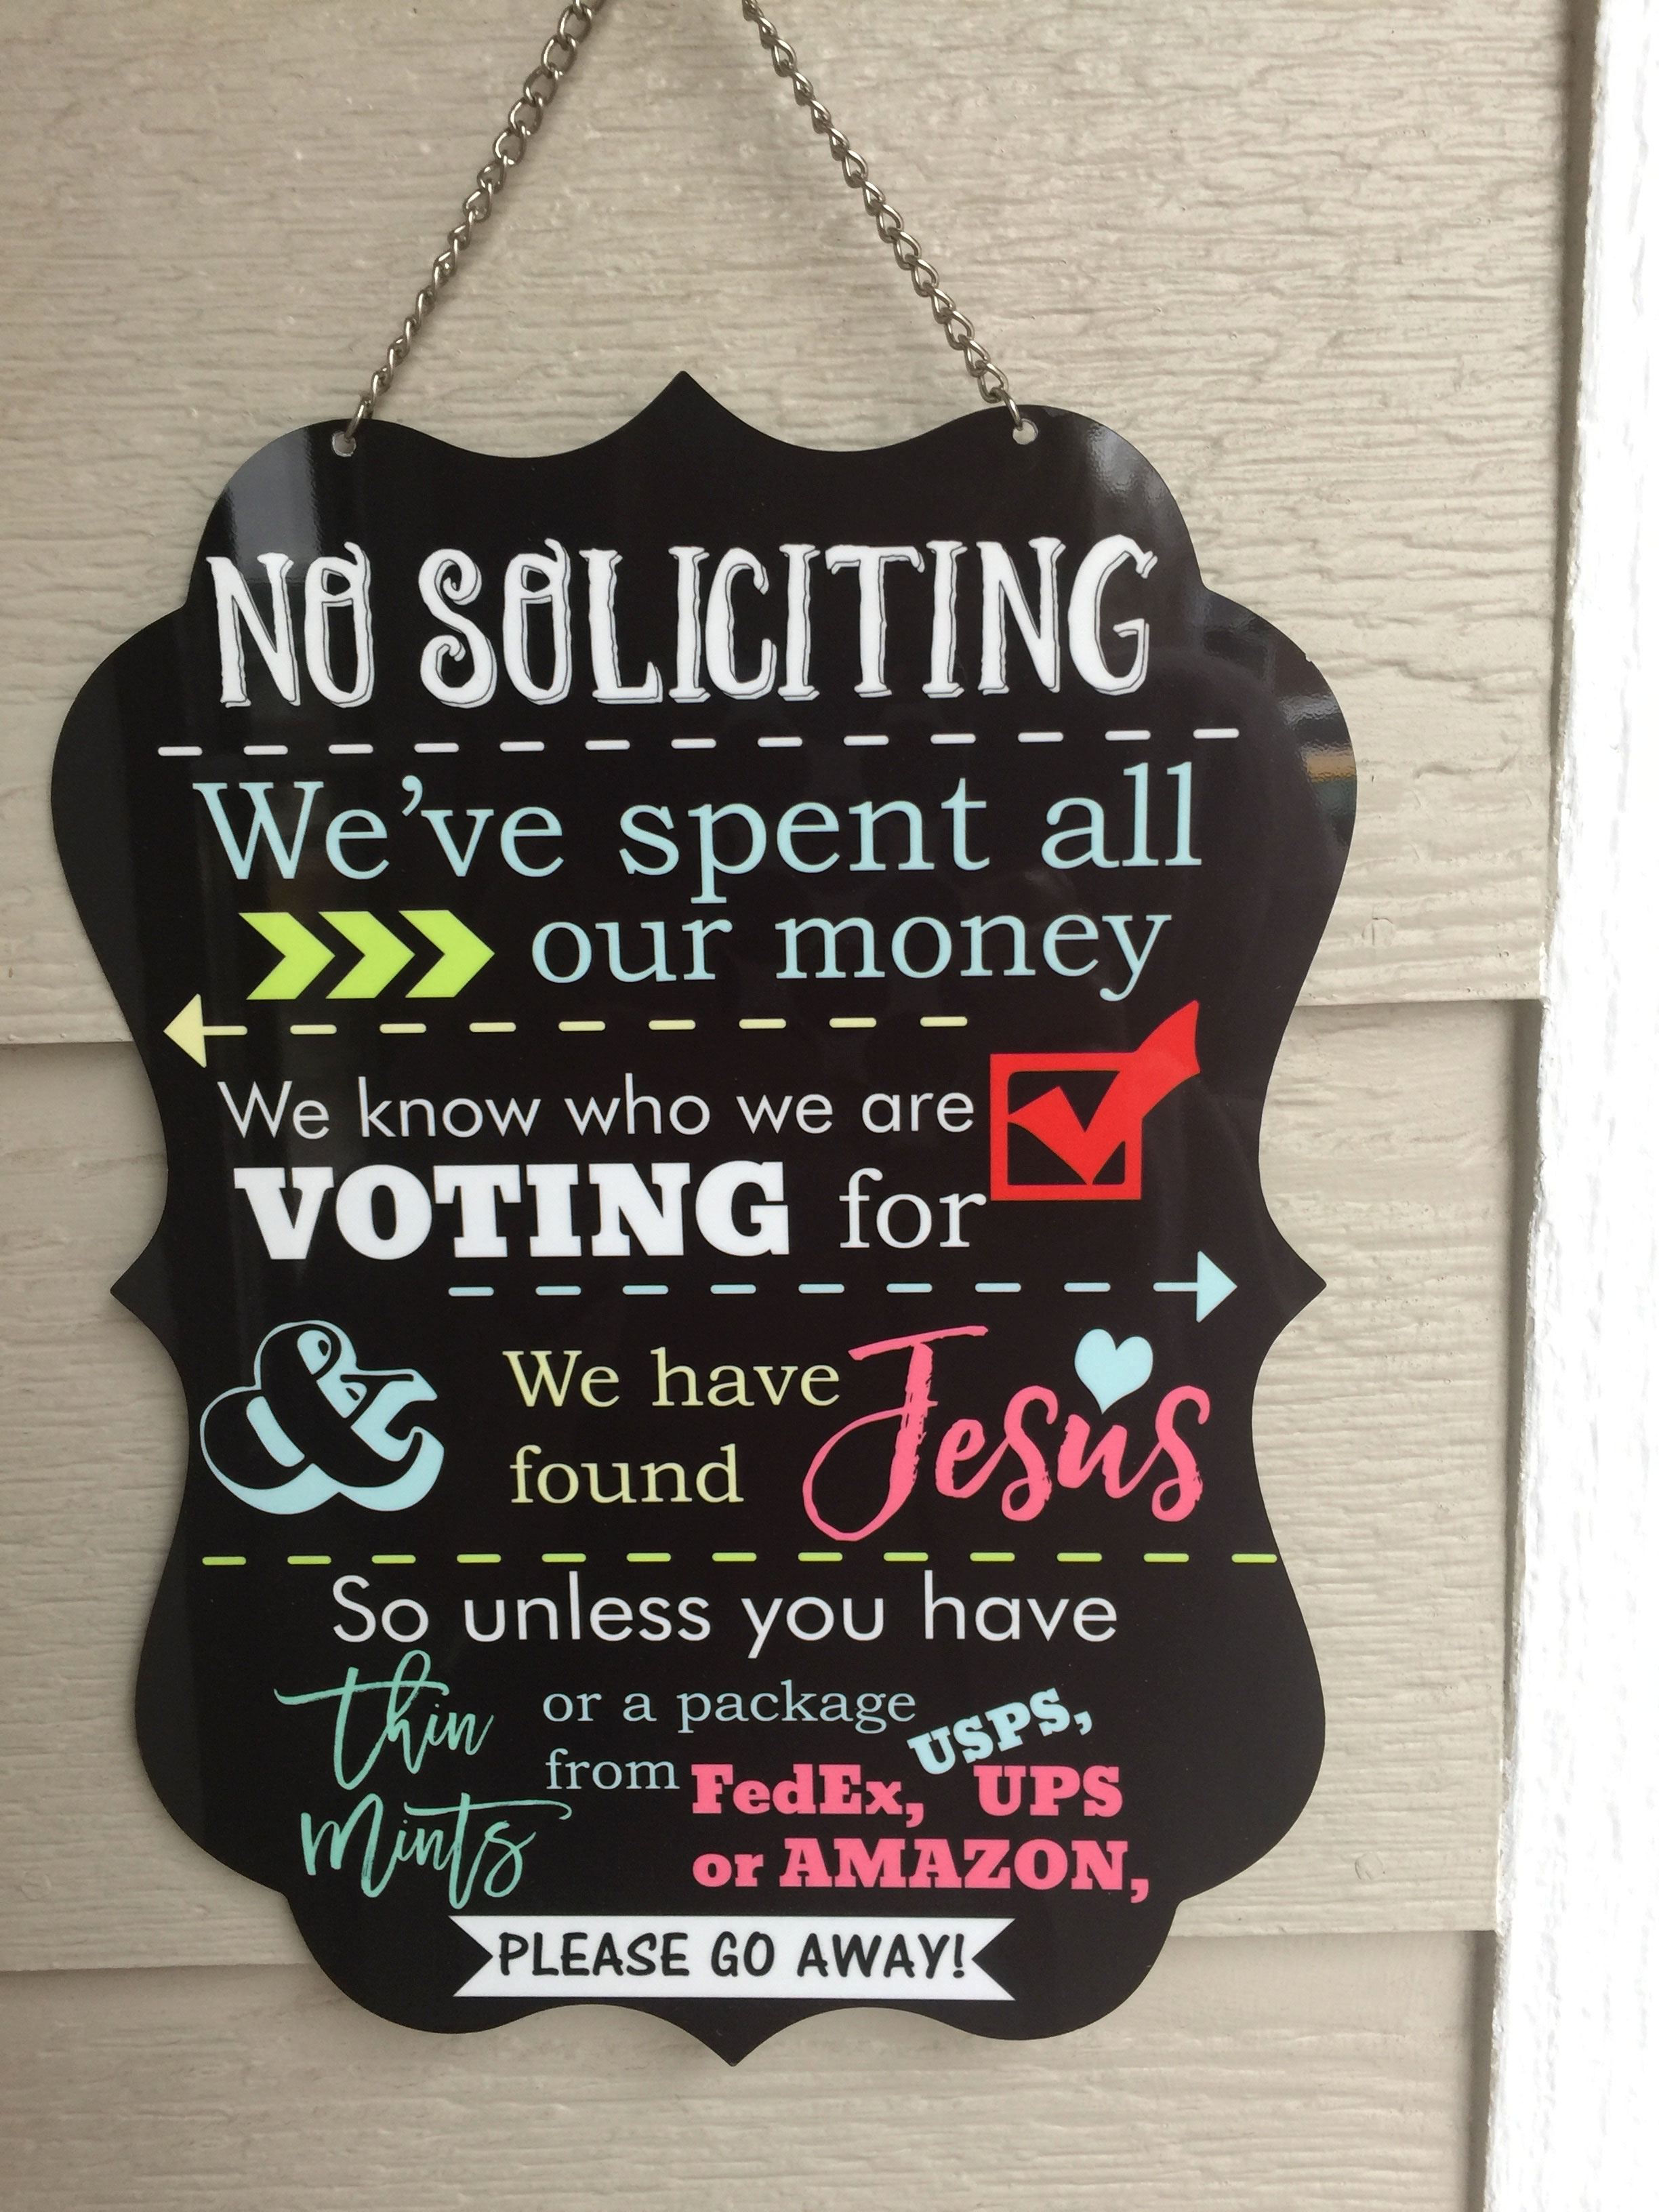 No Soliciting-Creative Borders Benelux made with sublimation printing